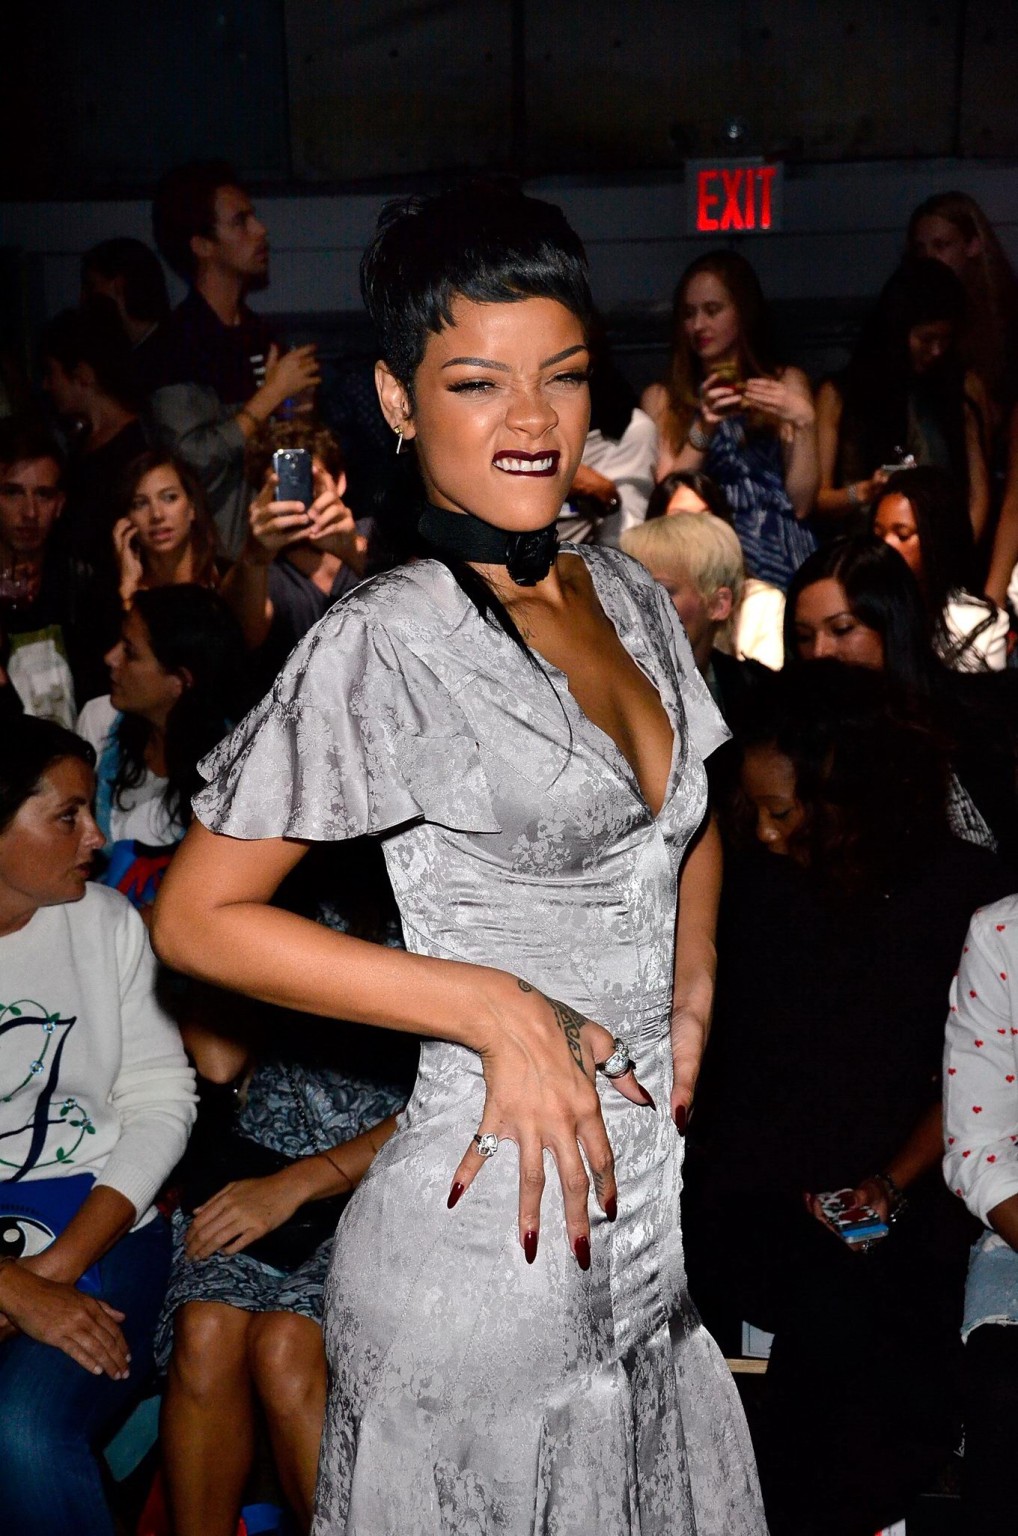 Rihanna showing off her stockings at the fashion show in NYC #75219314